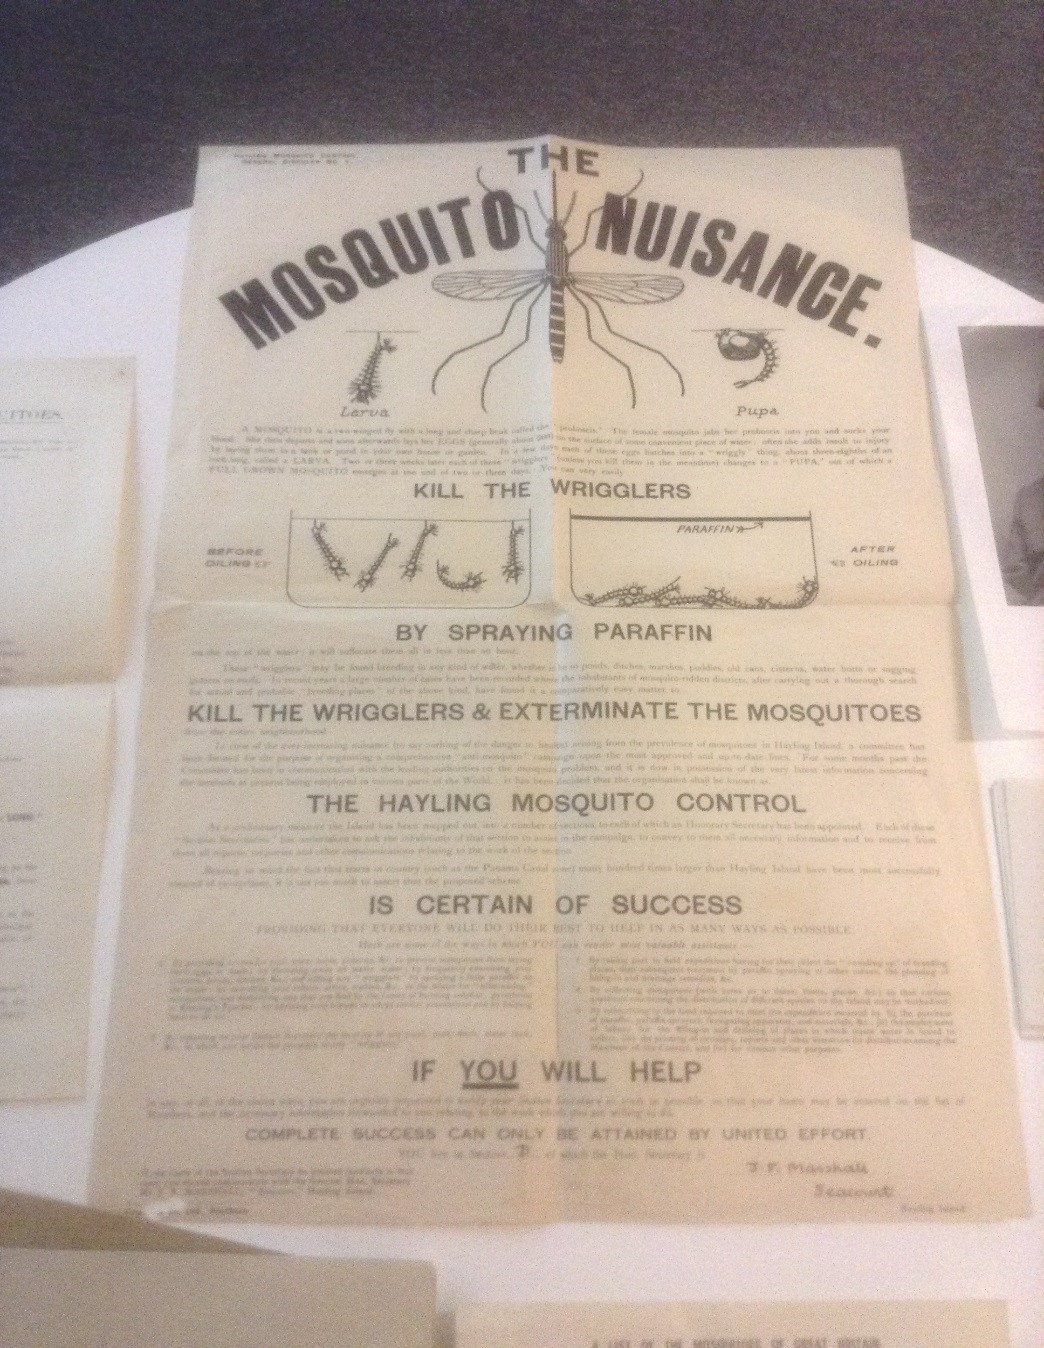 A poster produced by the British Mosquito Control Institute in the 1920s